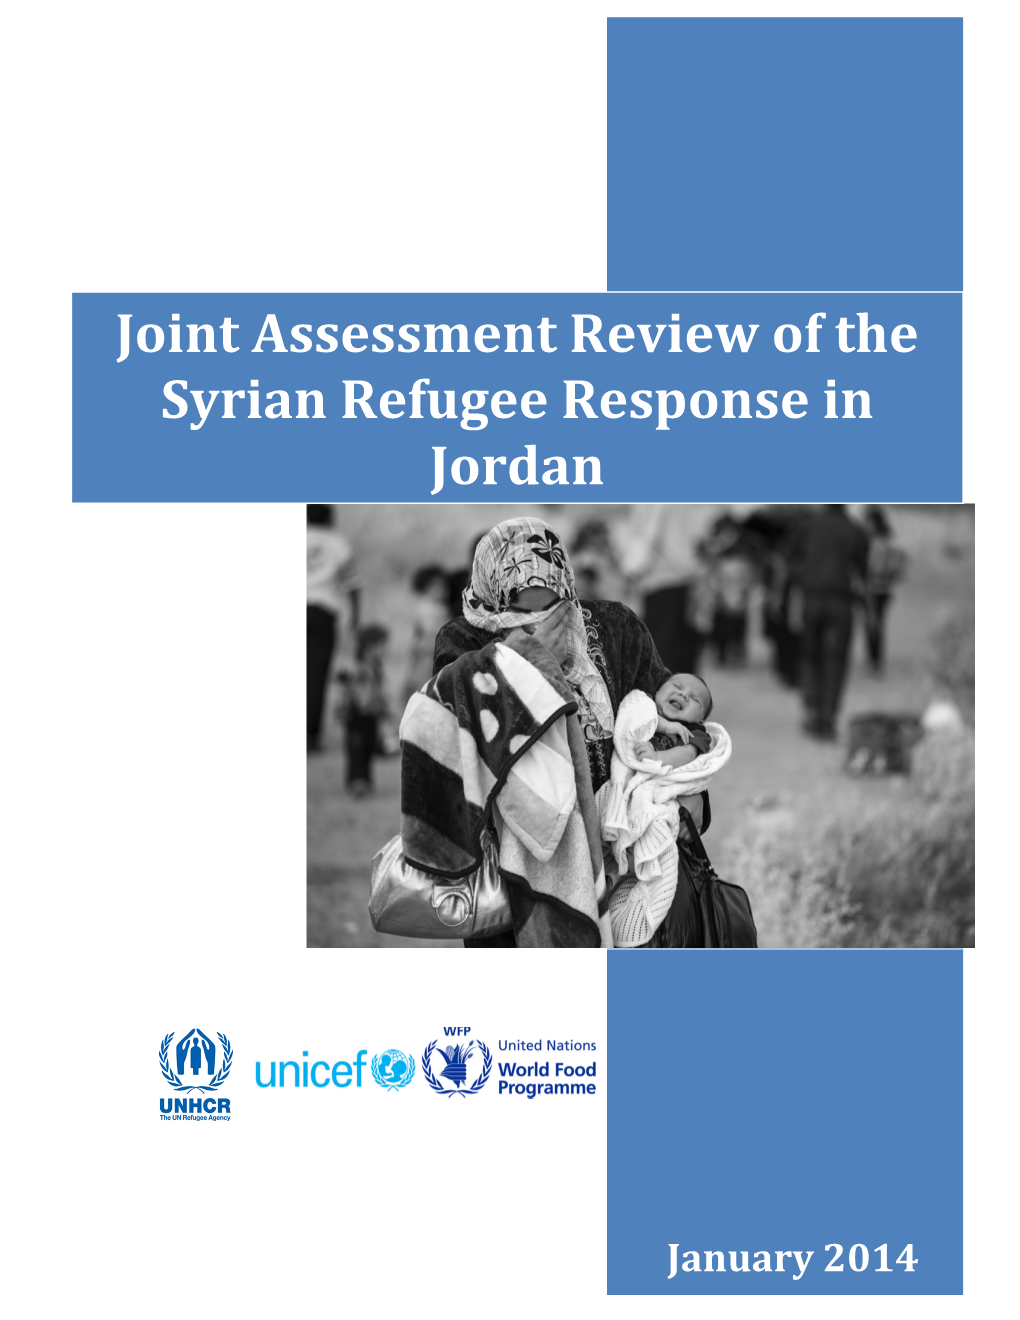 Joint Assessment Review of the Syrian Refugee Response in Jordan